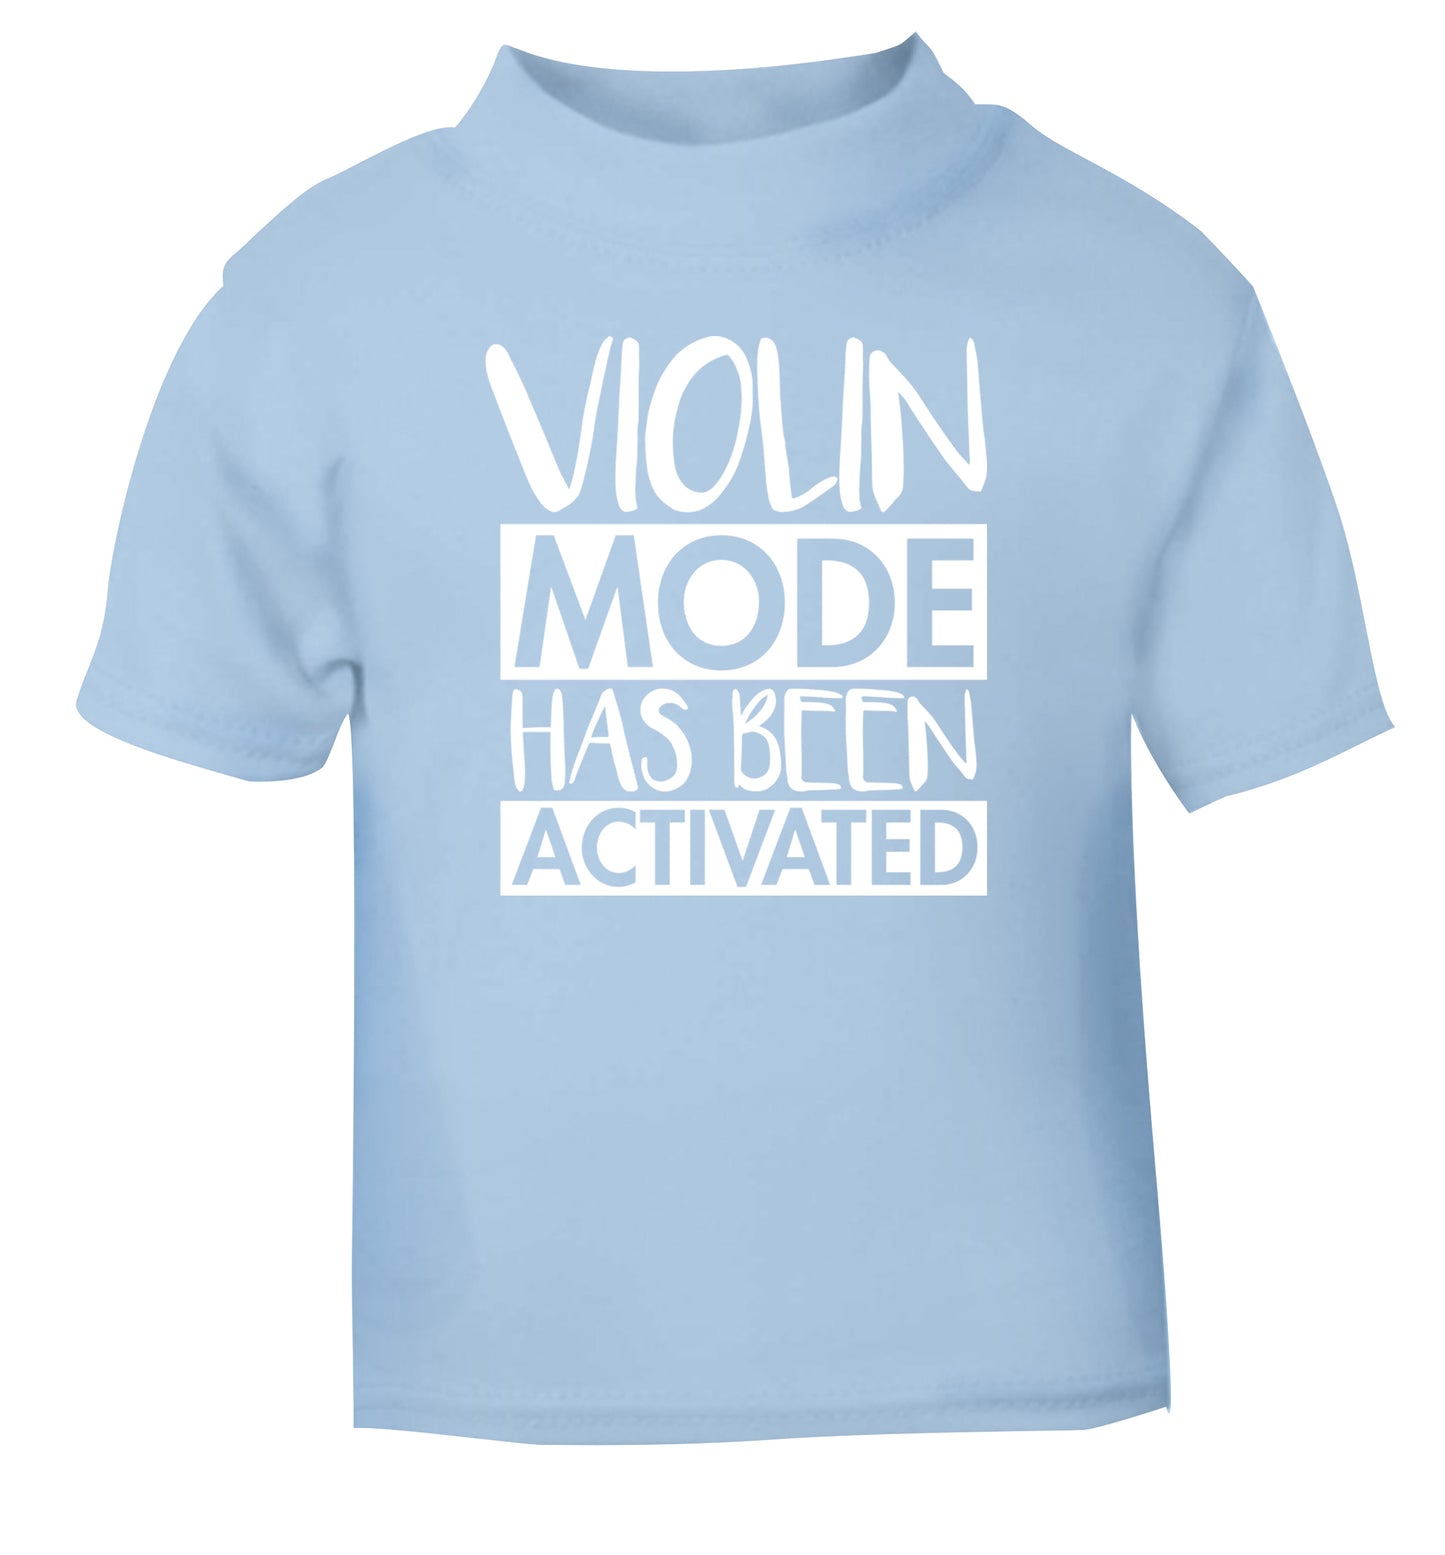 Violin Mode Activated light blue Baby Toddler Tshirt 2 Years